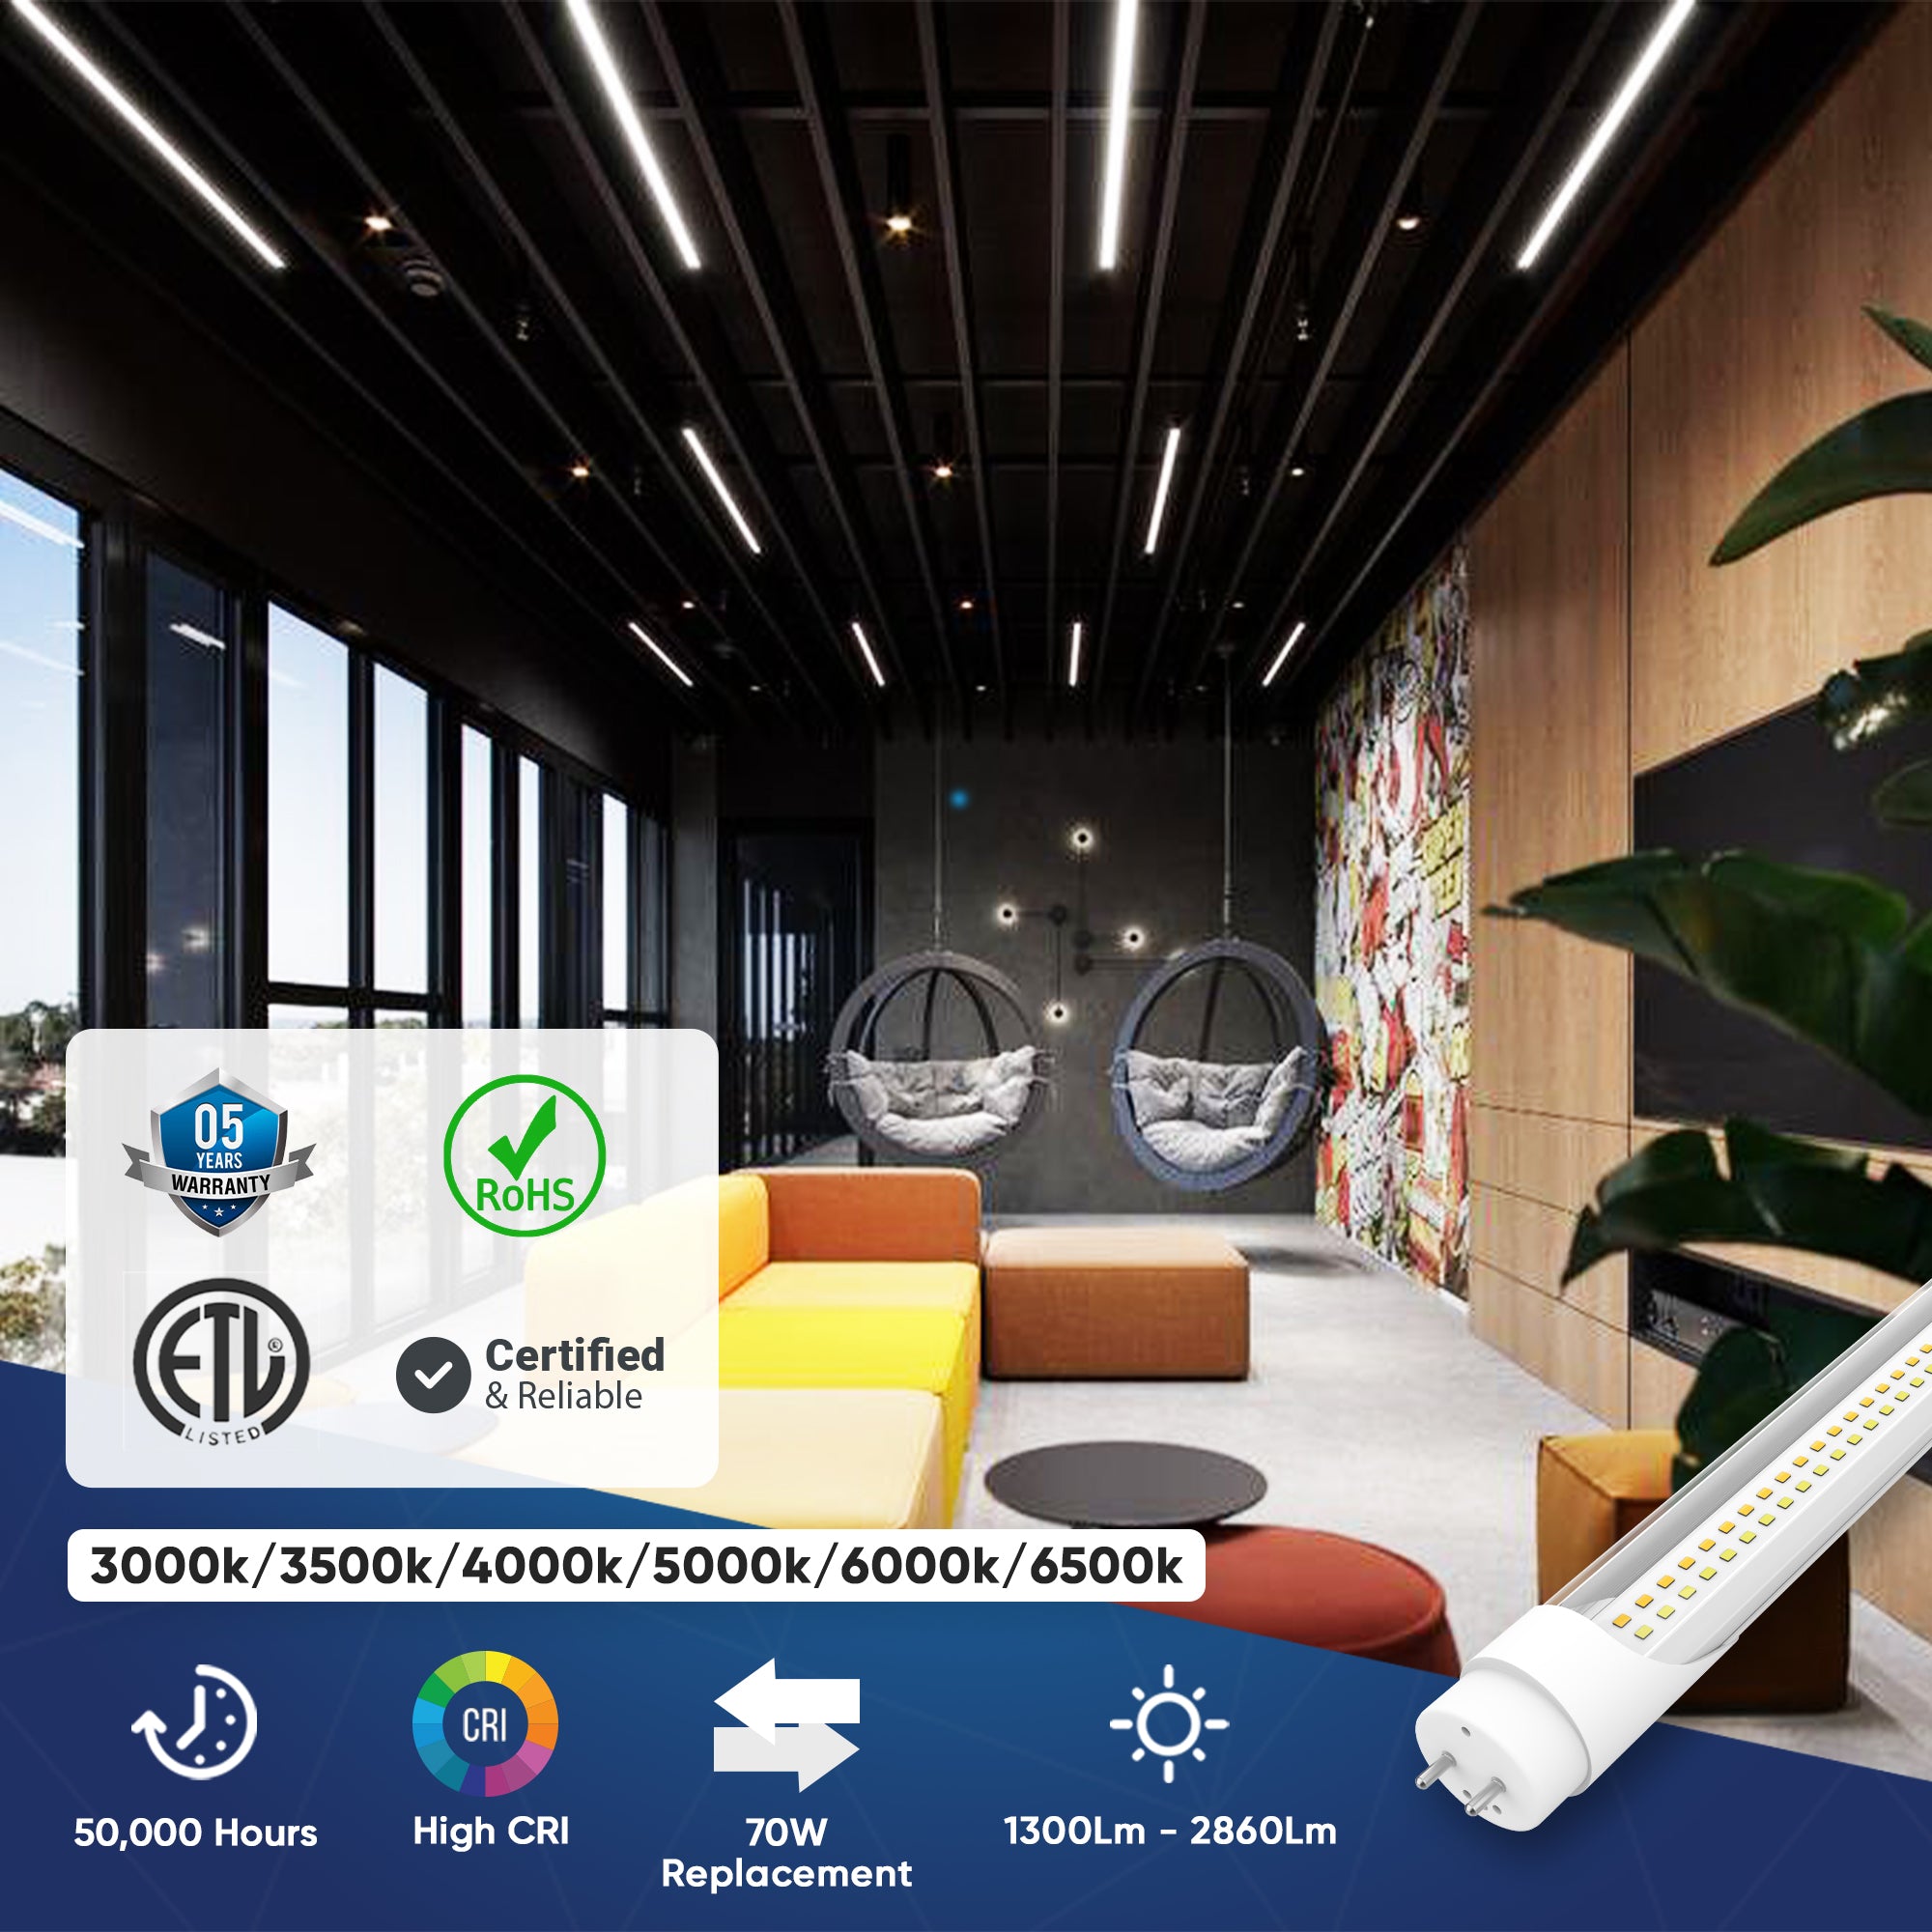 Hybrid T8 4ft LED Tube/Bulb - 22w/20w/18w/15w/12w/10w Wattage Adjustable, 130lm/w, 3000k/3500k/4000k/5000k/ 6000k/6500k CCT Changeable, Clear, Base G13, Single End/Double End Power - Ballast Compatible or Bypass